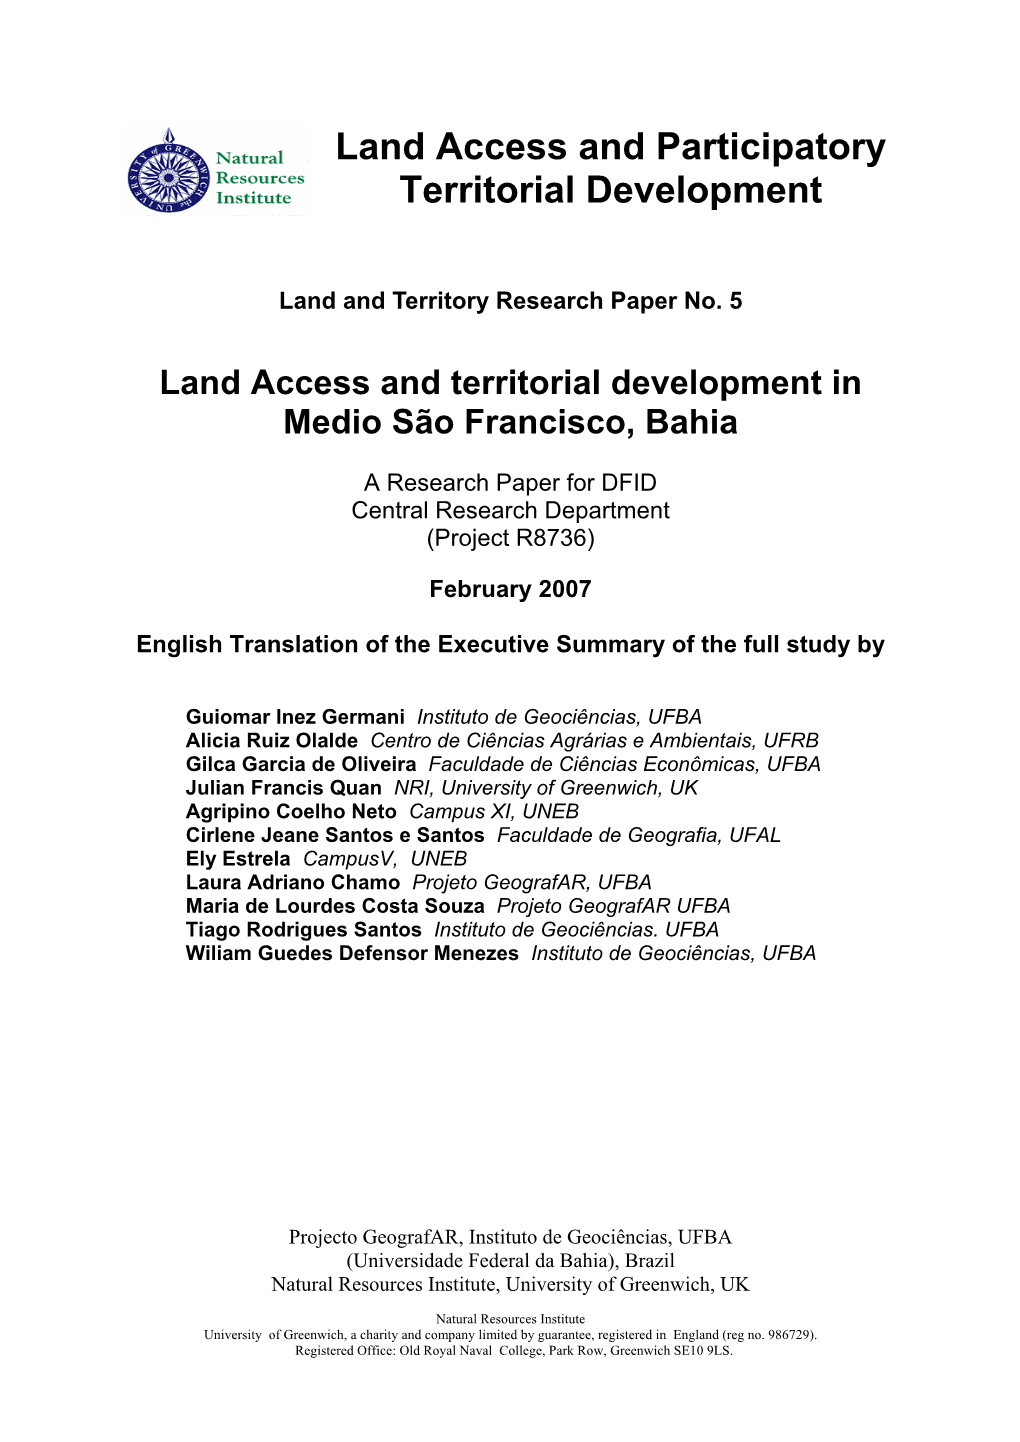 Land Access and Participatory Territorial Development